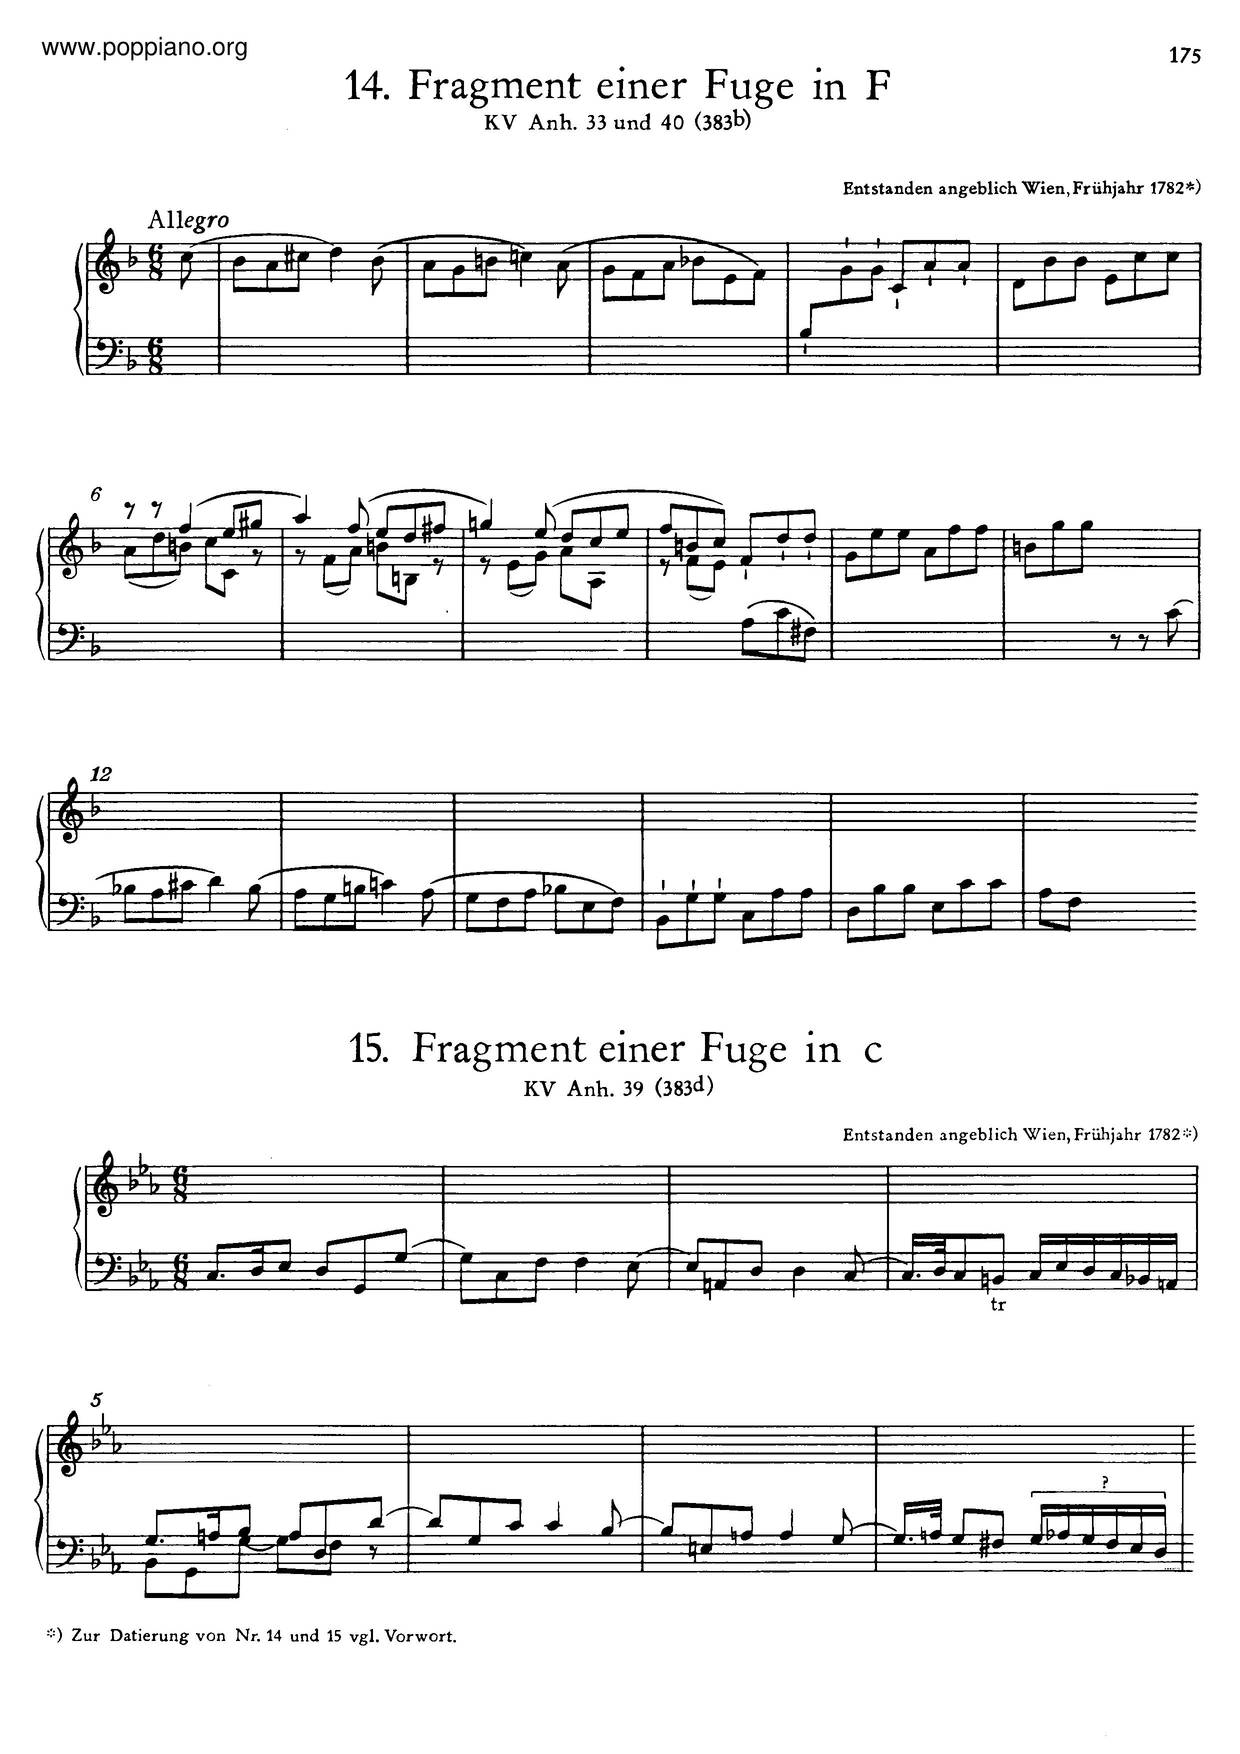 Fugue In C Minor, K. Anh. 39/383Dピアノ譜